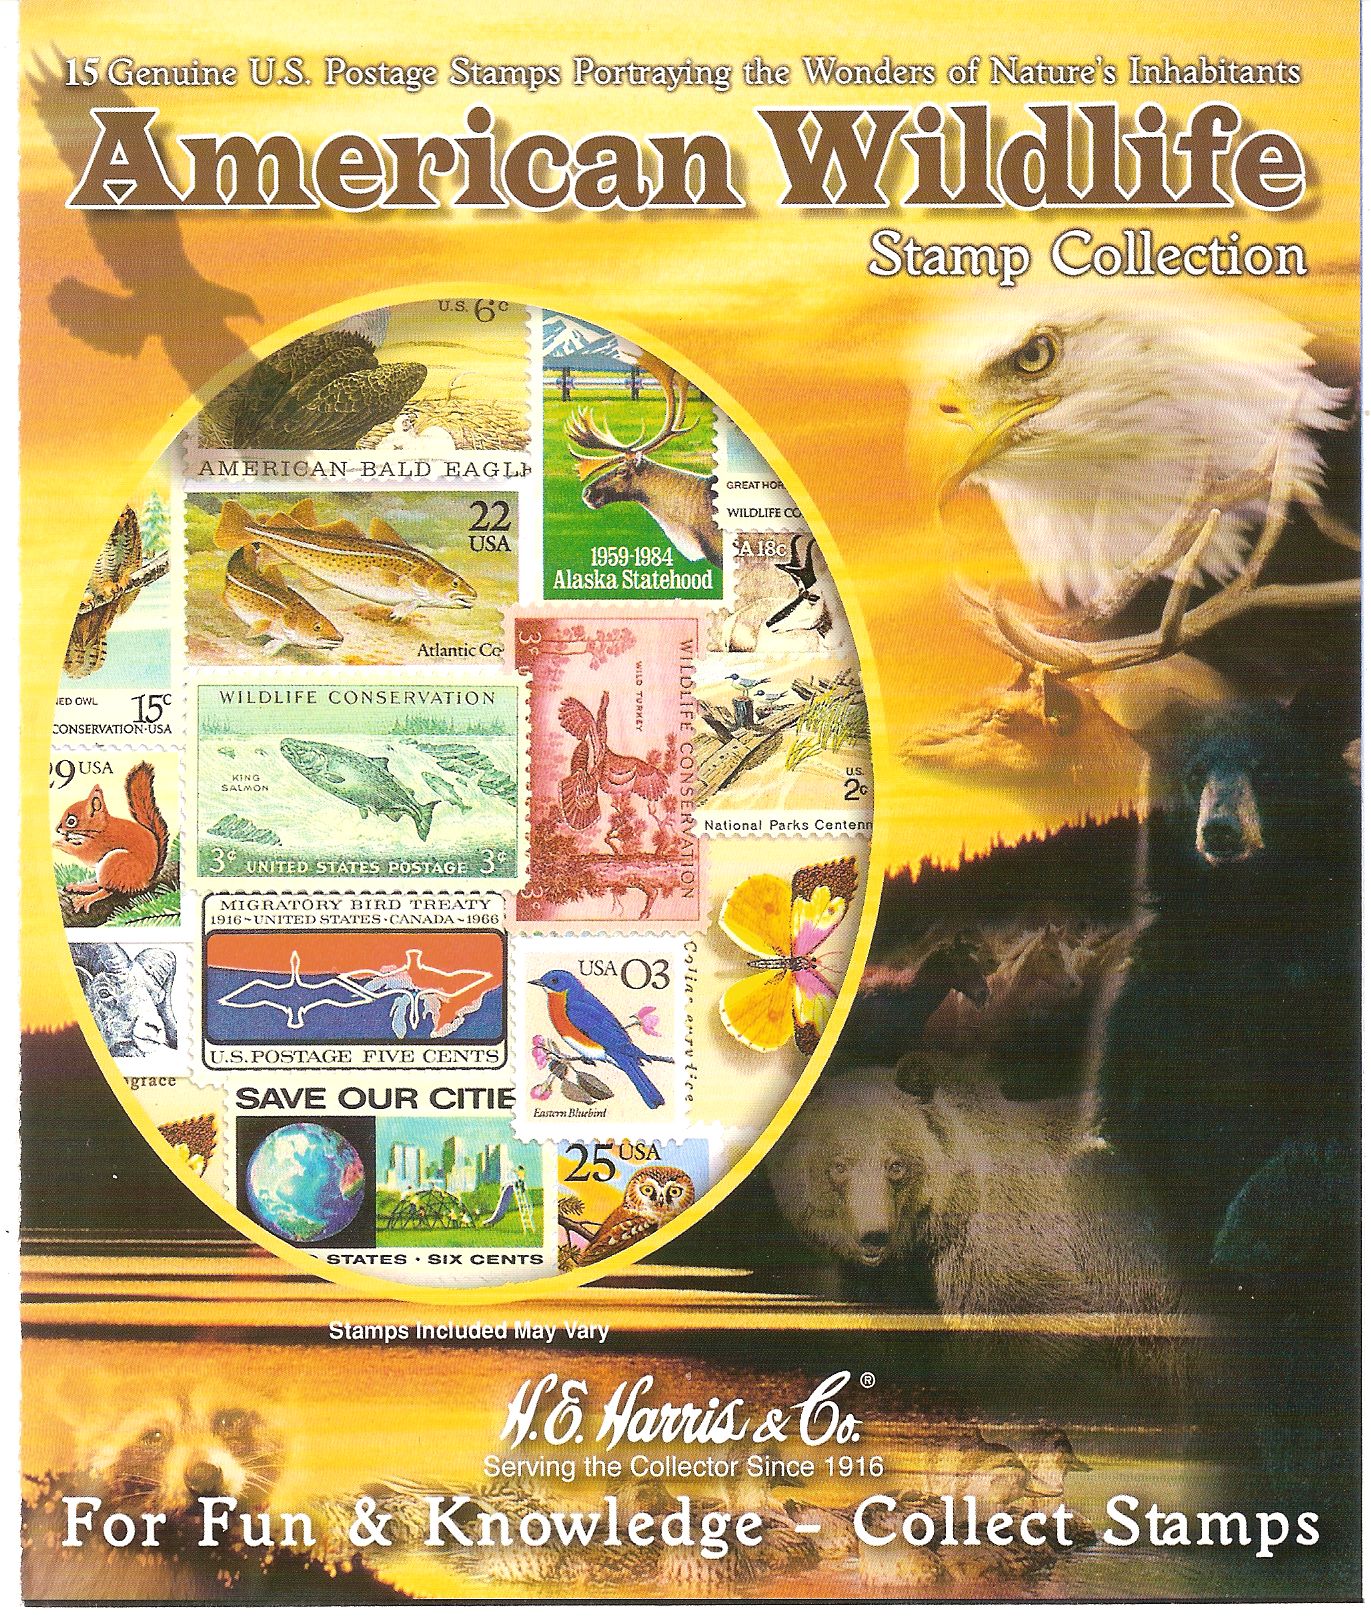 Get A Stamp Collection Celebrating American Wildlife